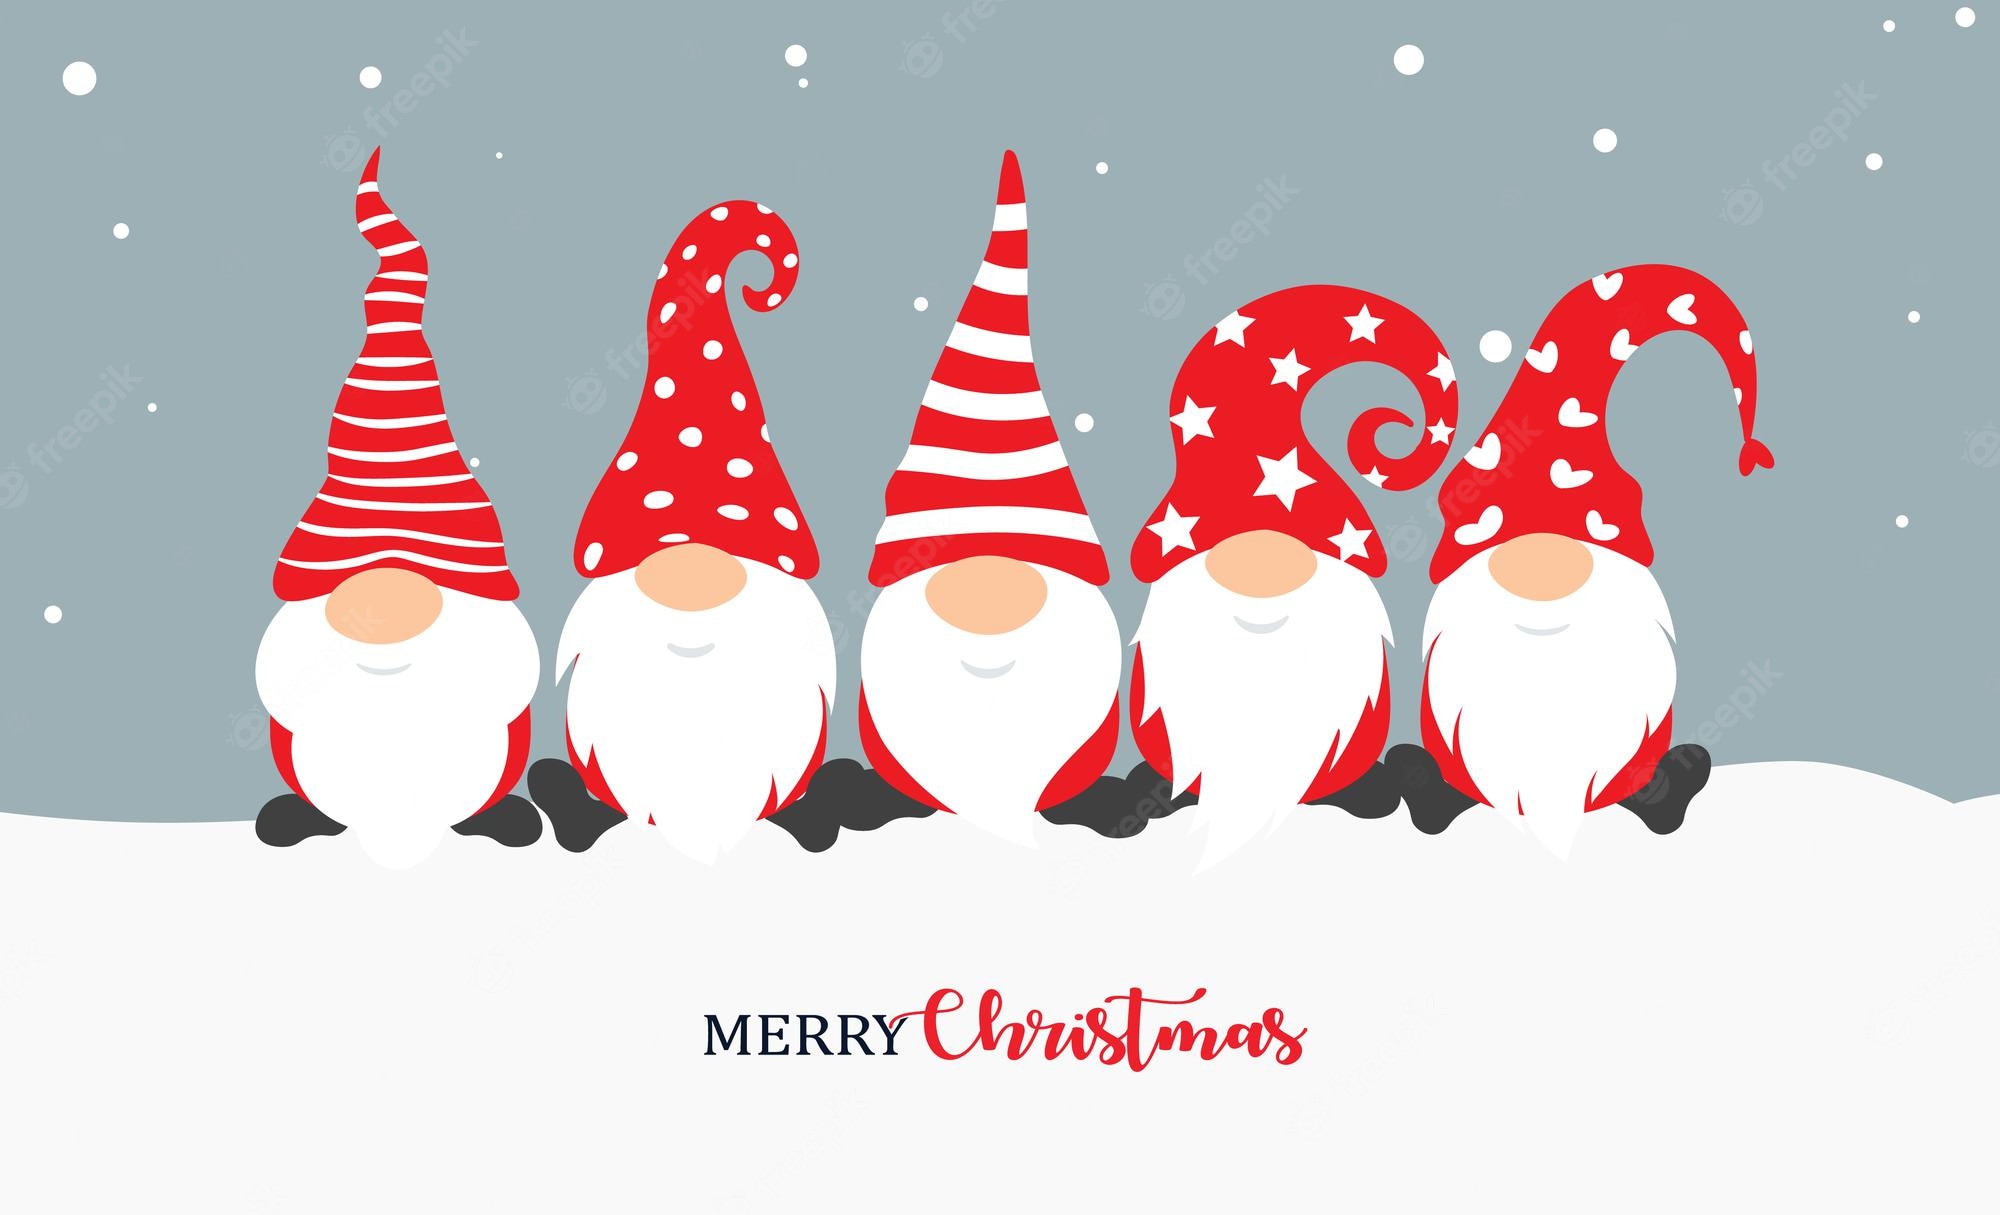 Christmas gnome background Image. Free Vectors, & PSD